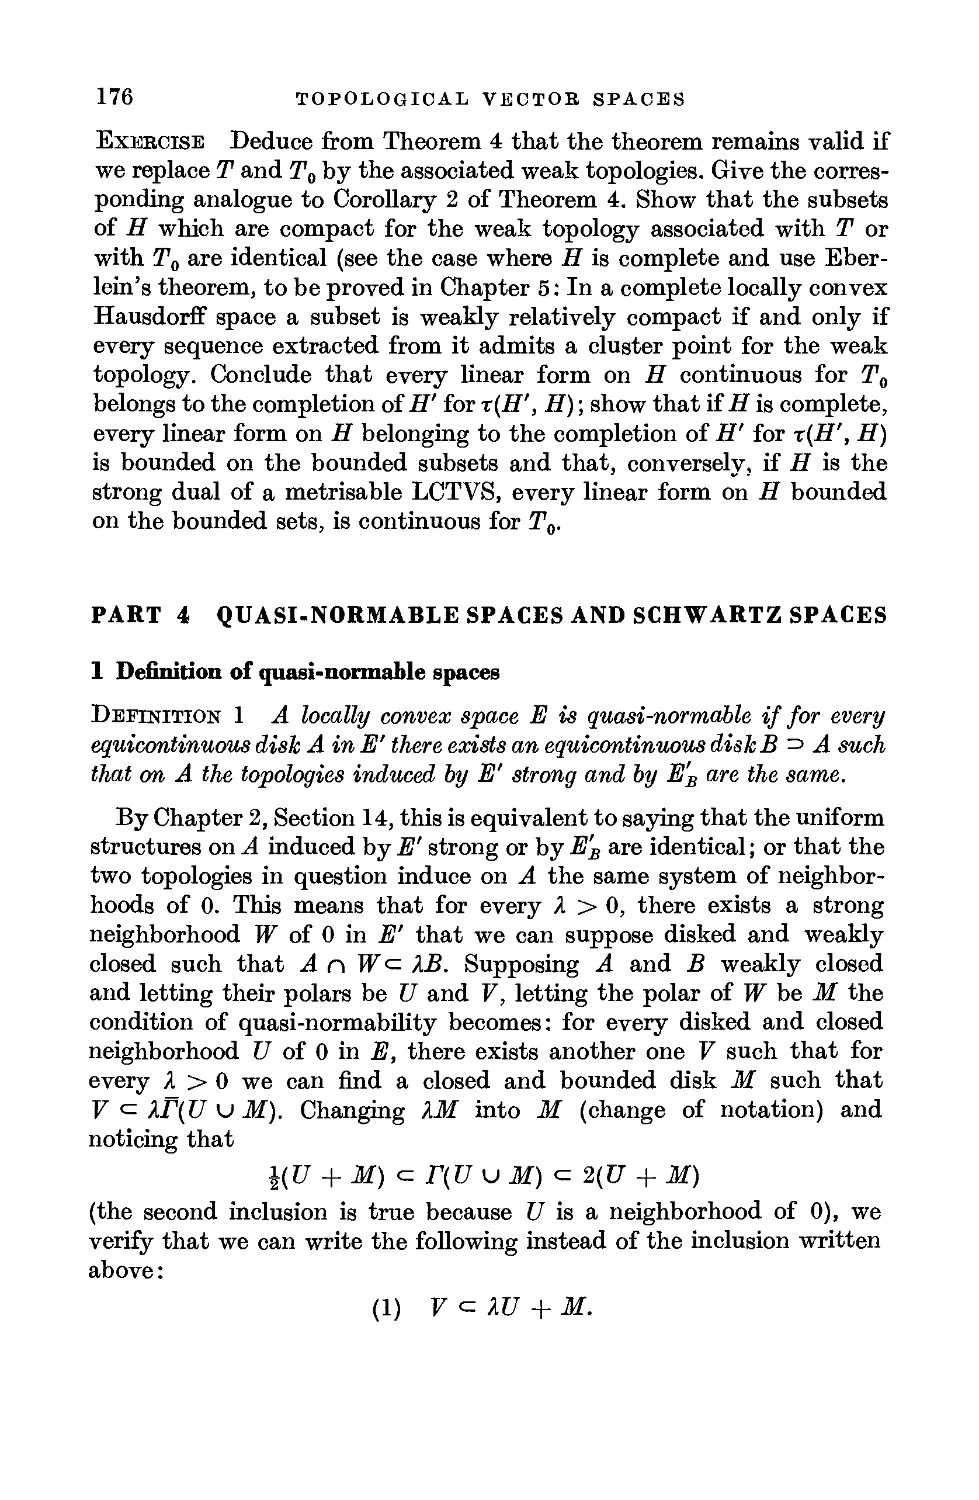 Part 4 Quasi-normable spaces and Schwartz spaces